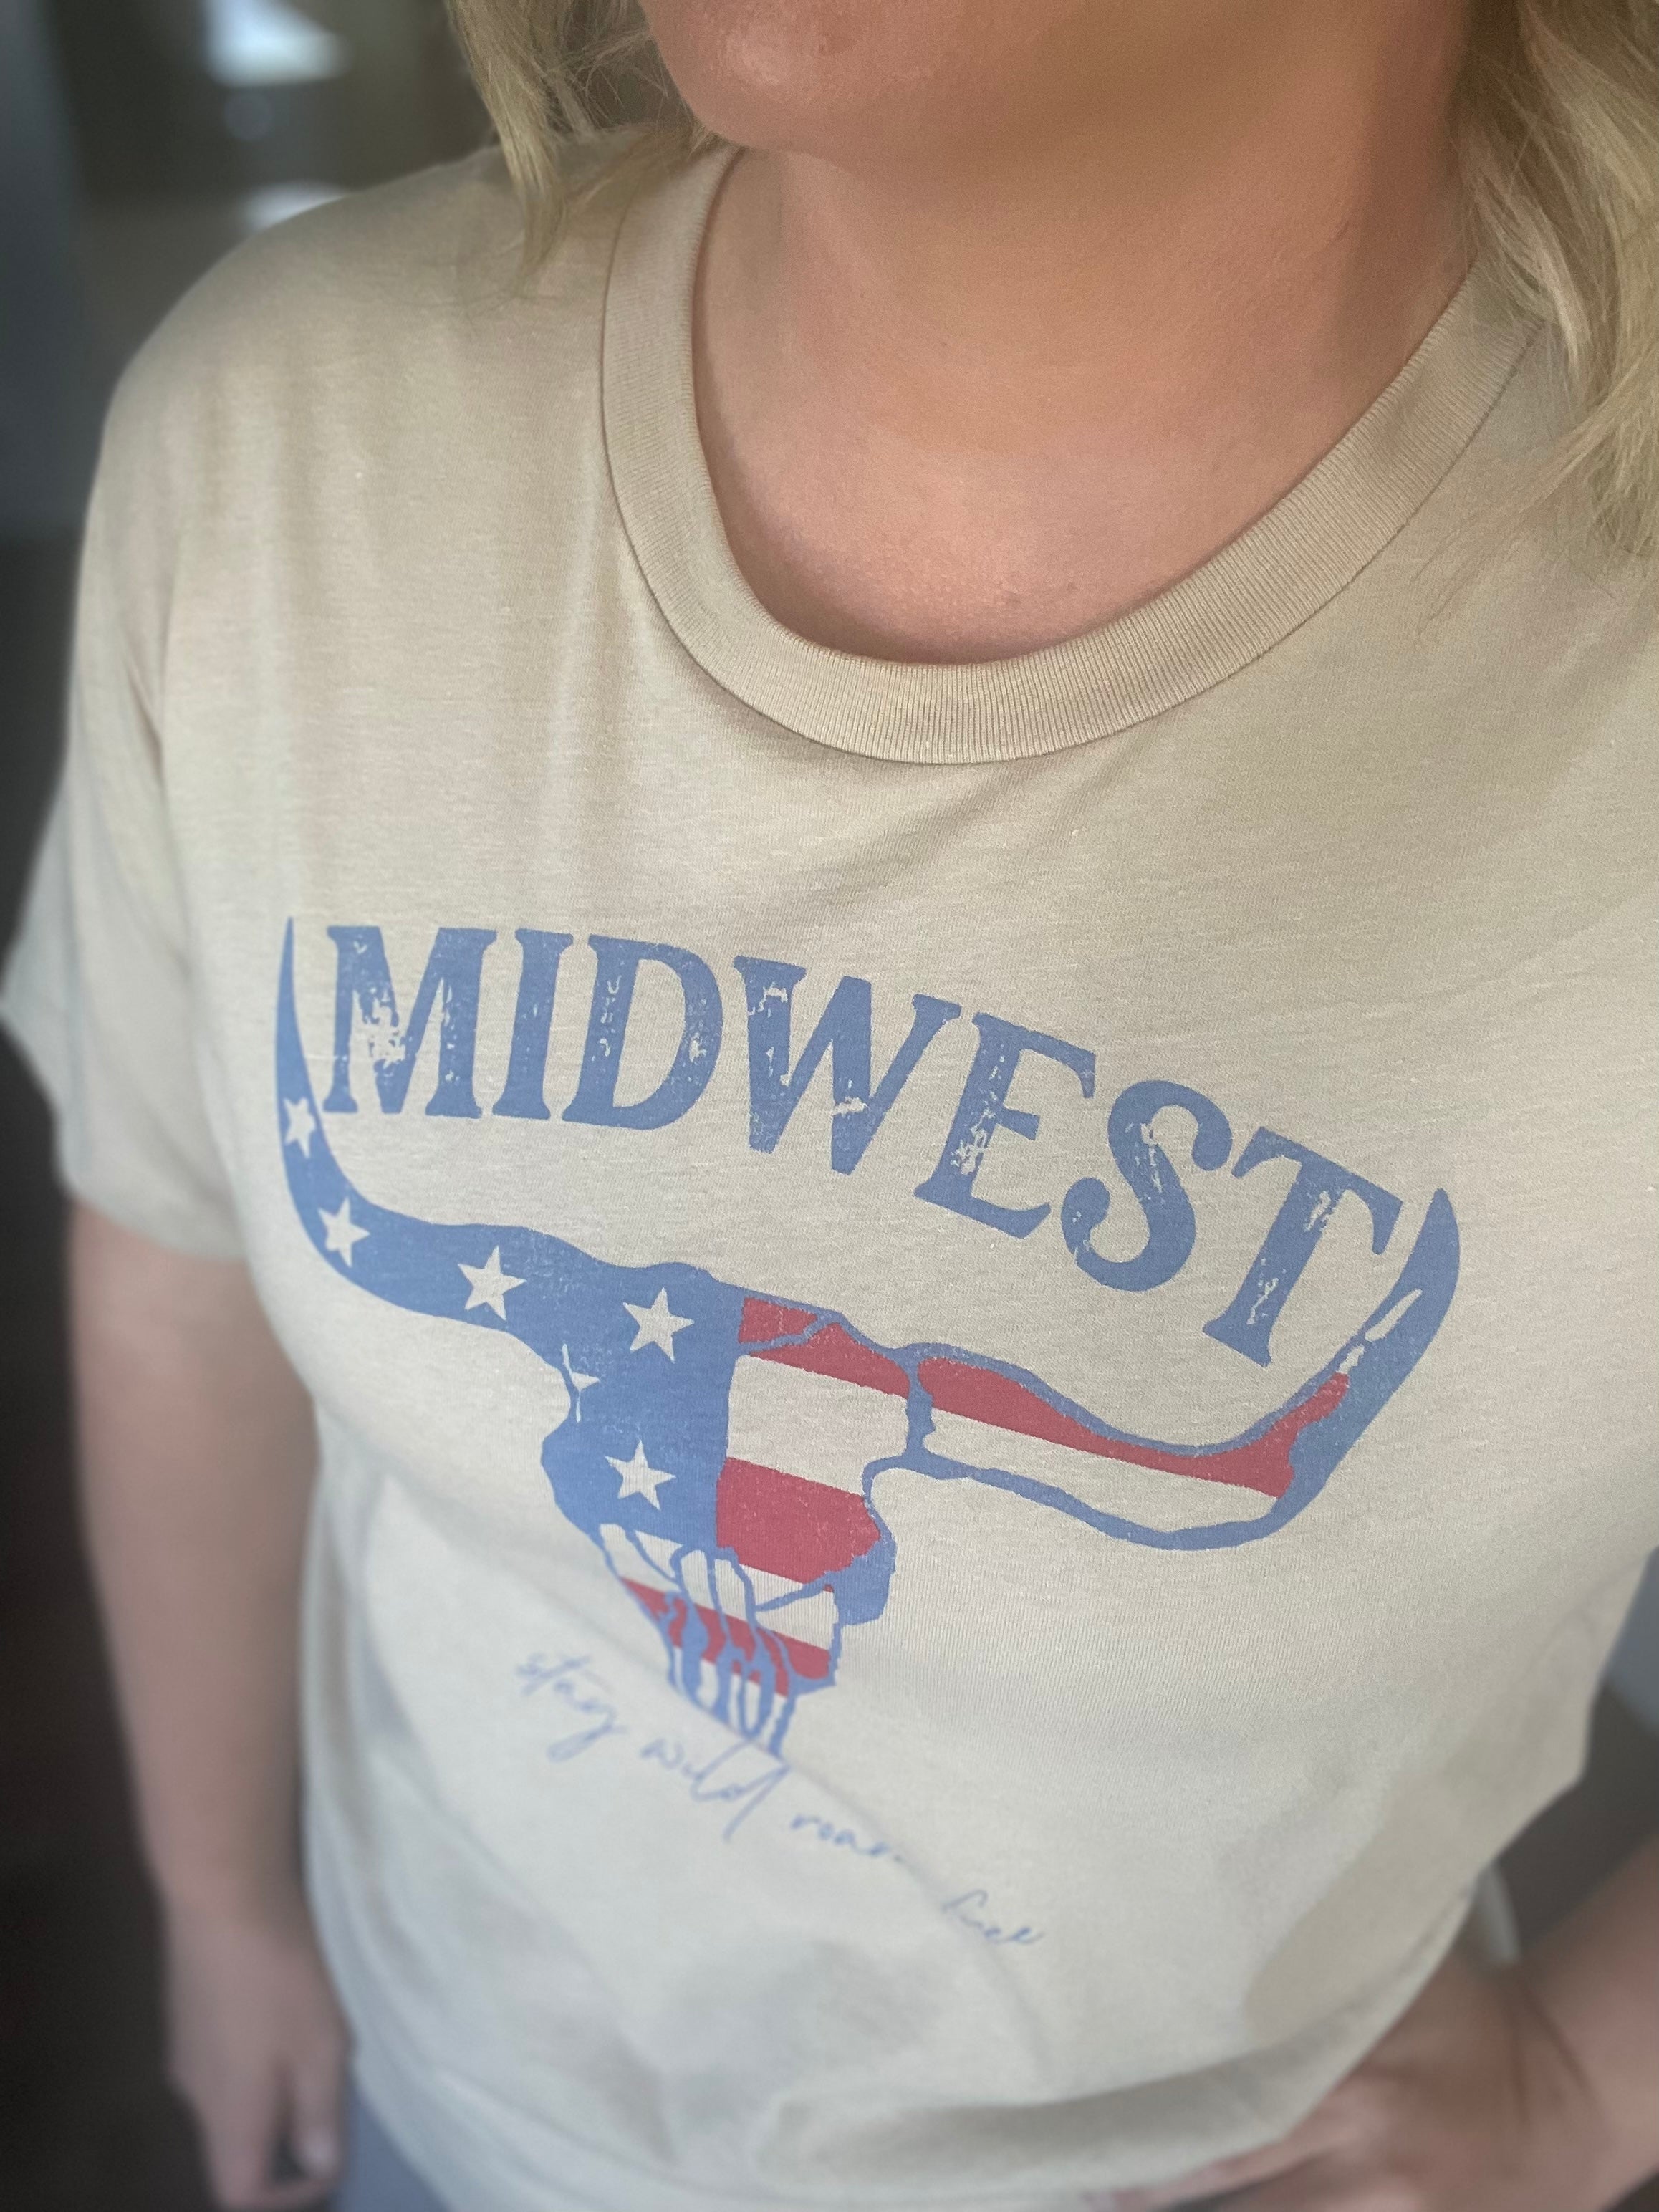 Midwest- Stay wild